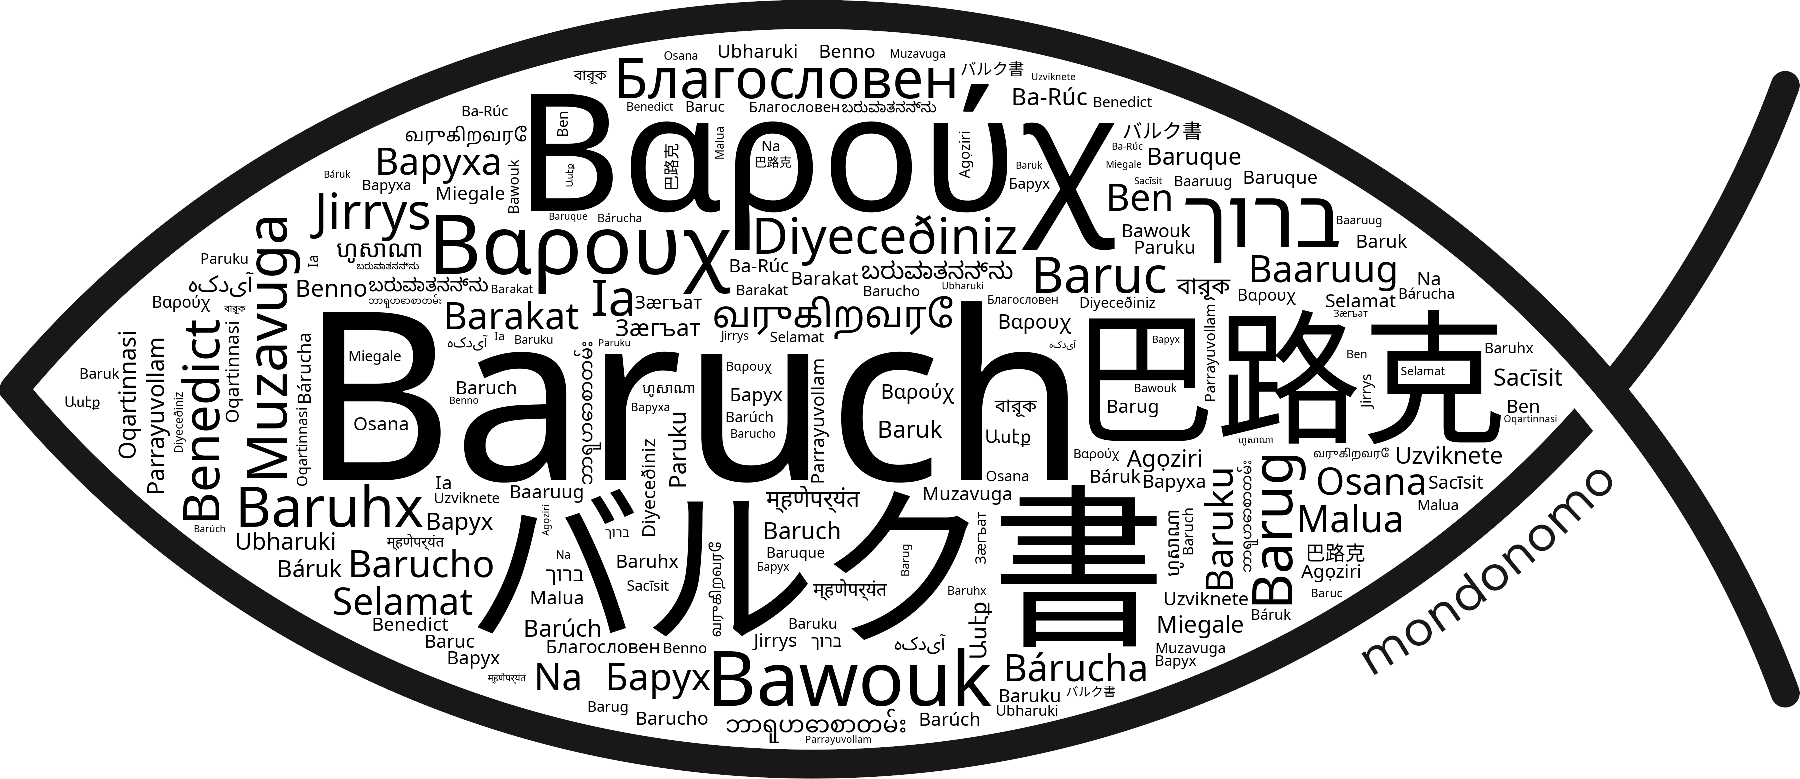 Name Baruch in the world's Bibles